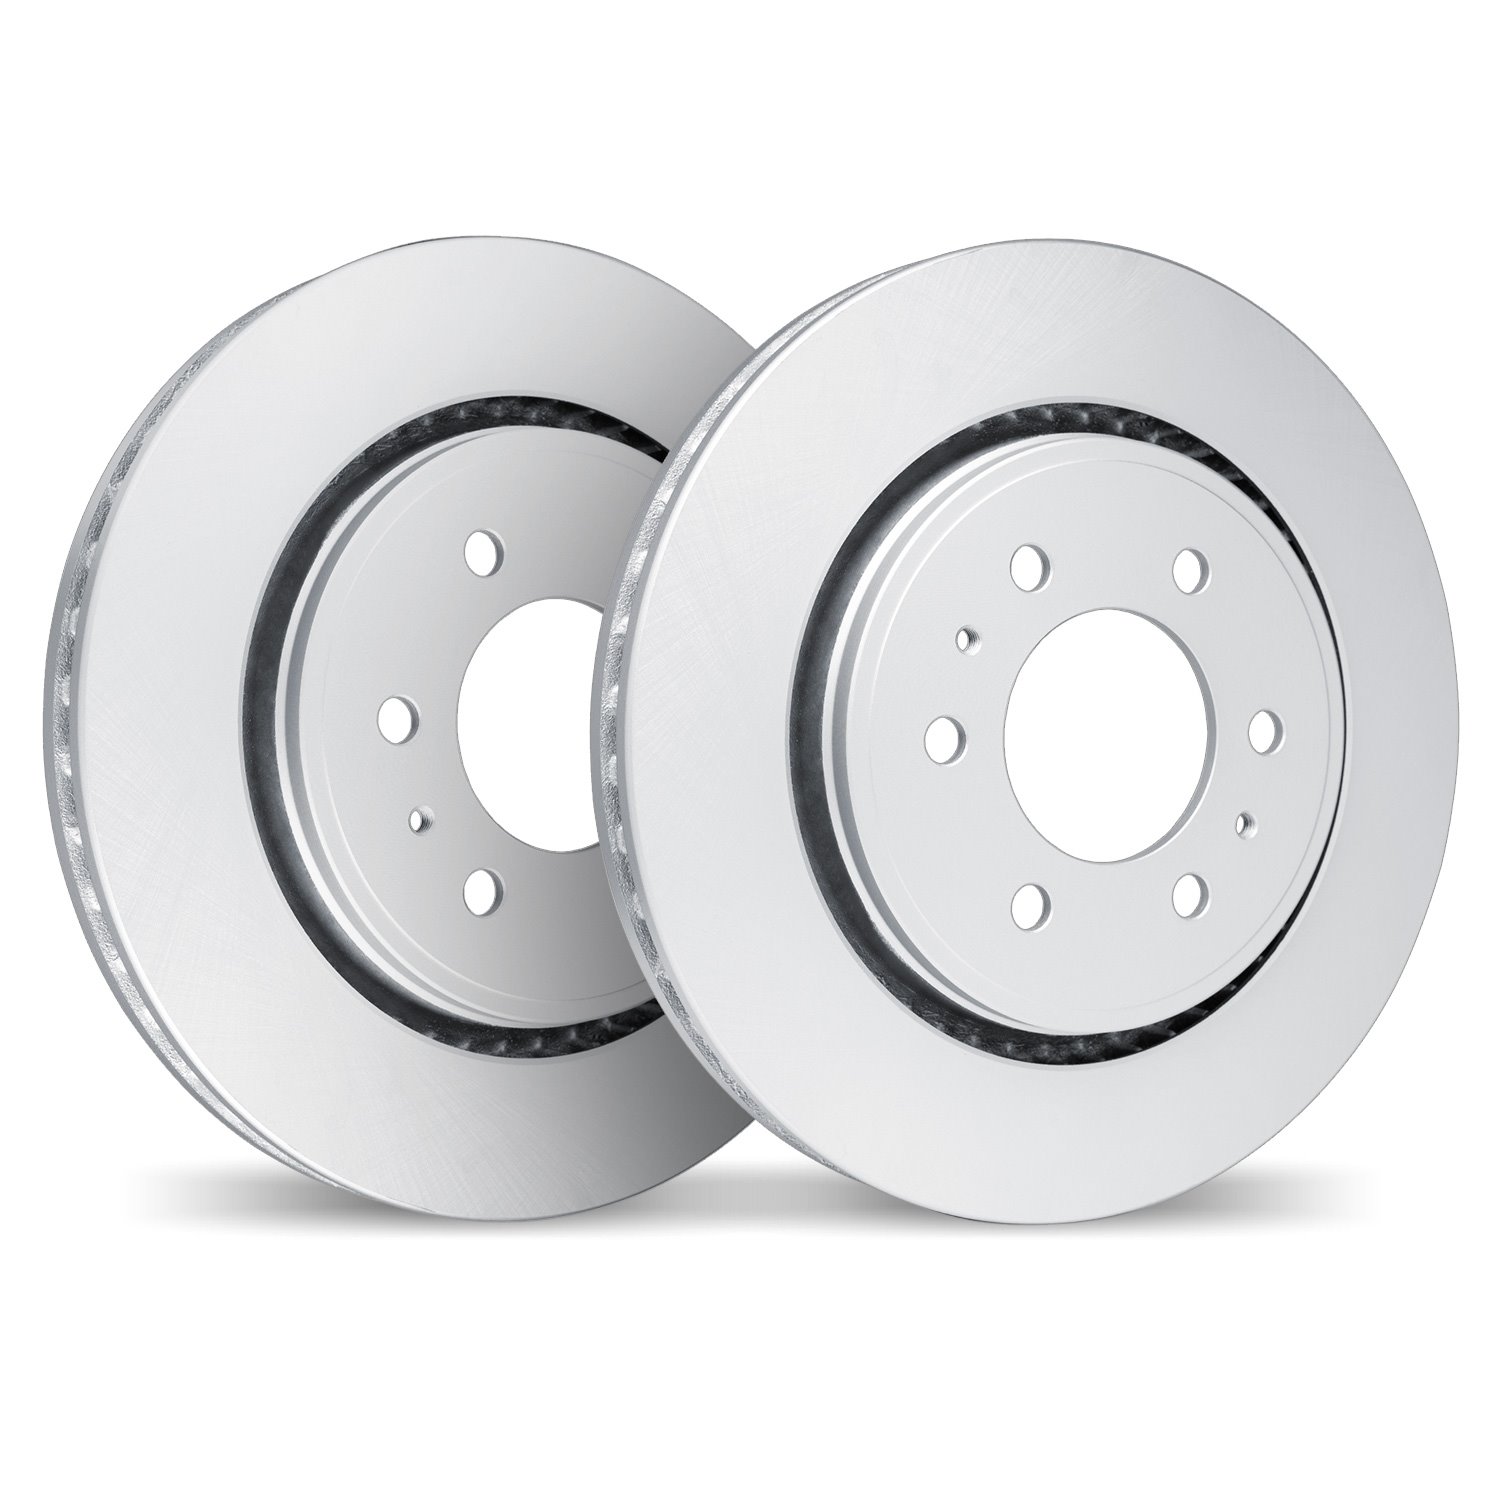 4002-54177 Geospec Brake Rotors, Fits Select Ford/Lincoln/Mercury/Mazda, Position: Front